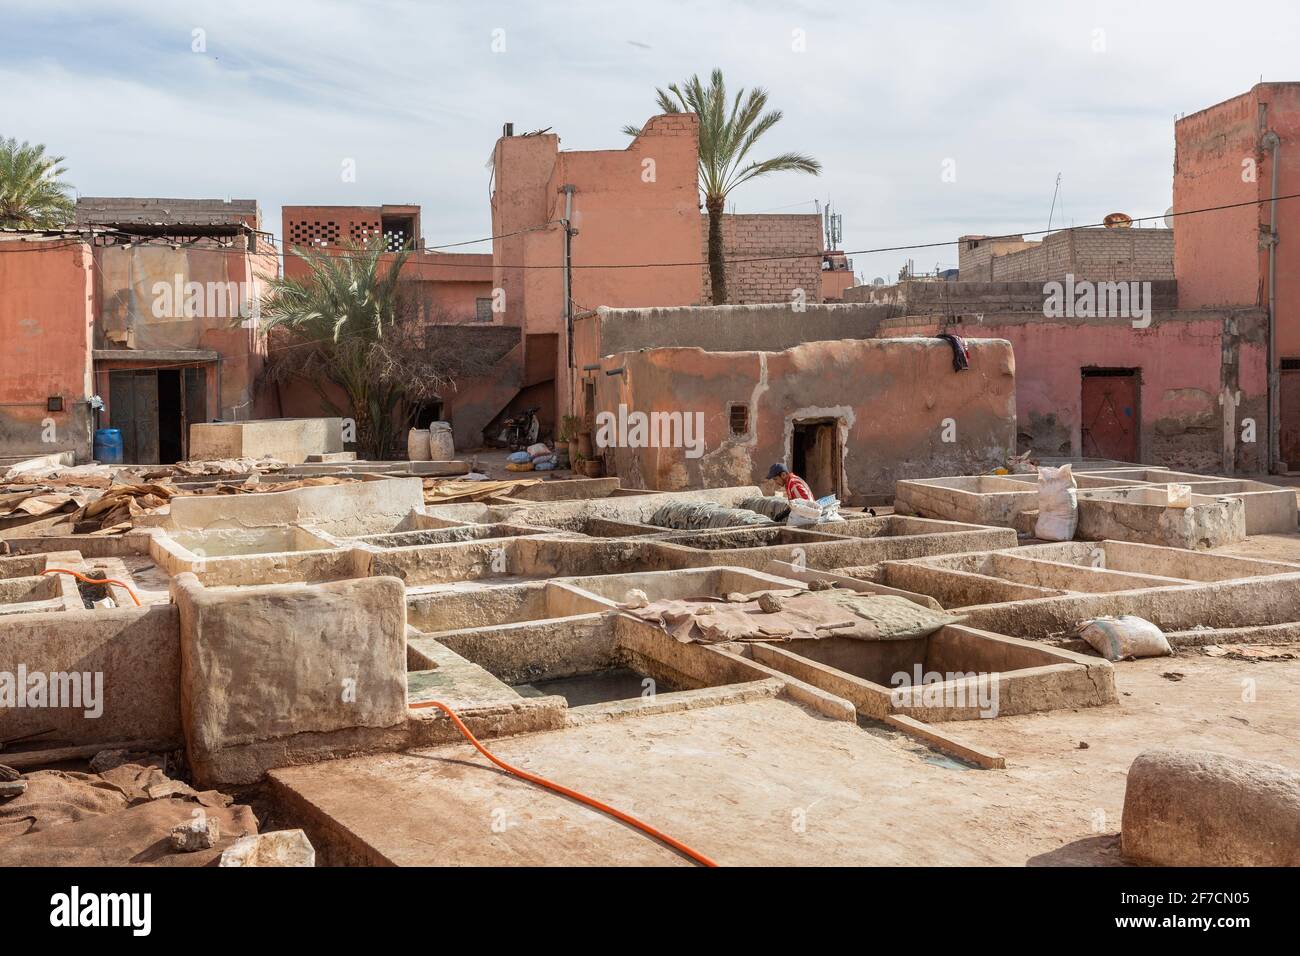 Inside a tannery of Marrakech, Morocco Stock Photo